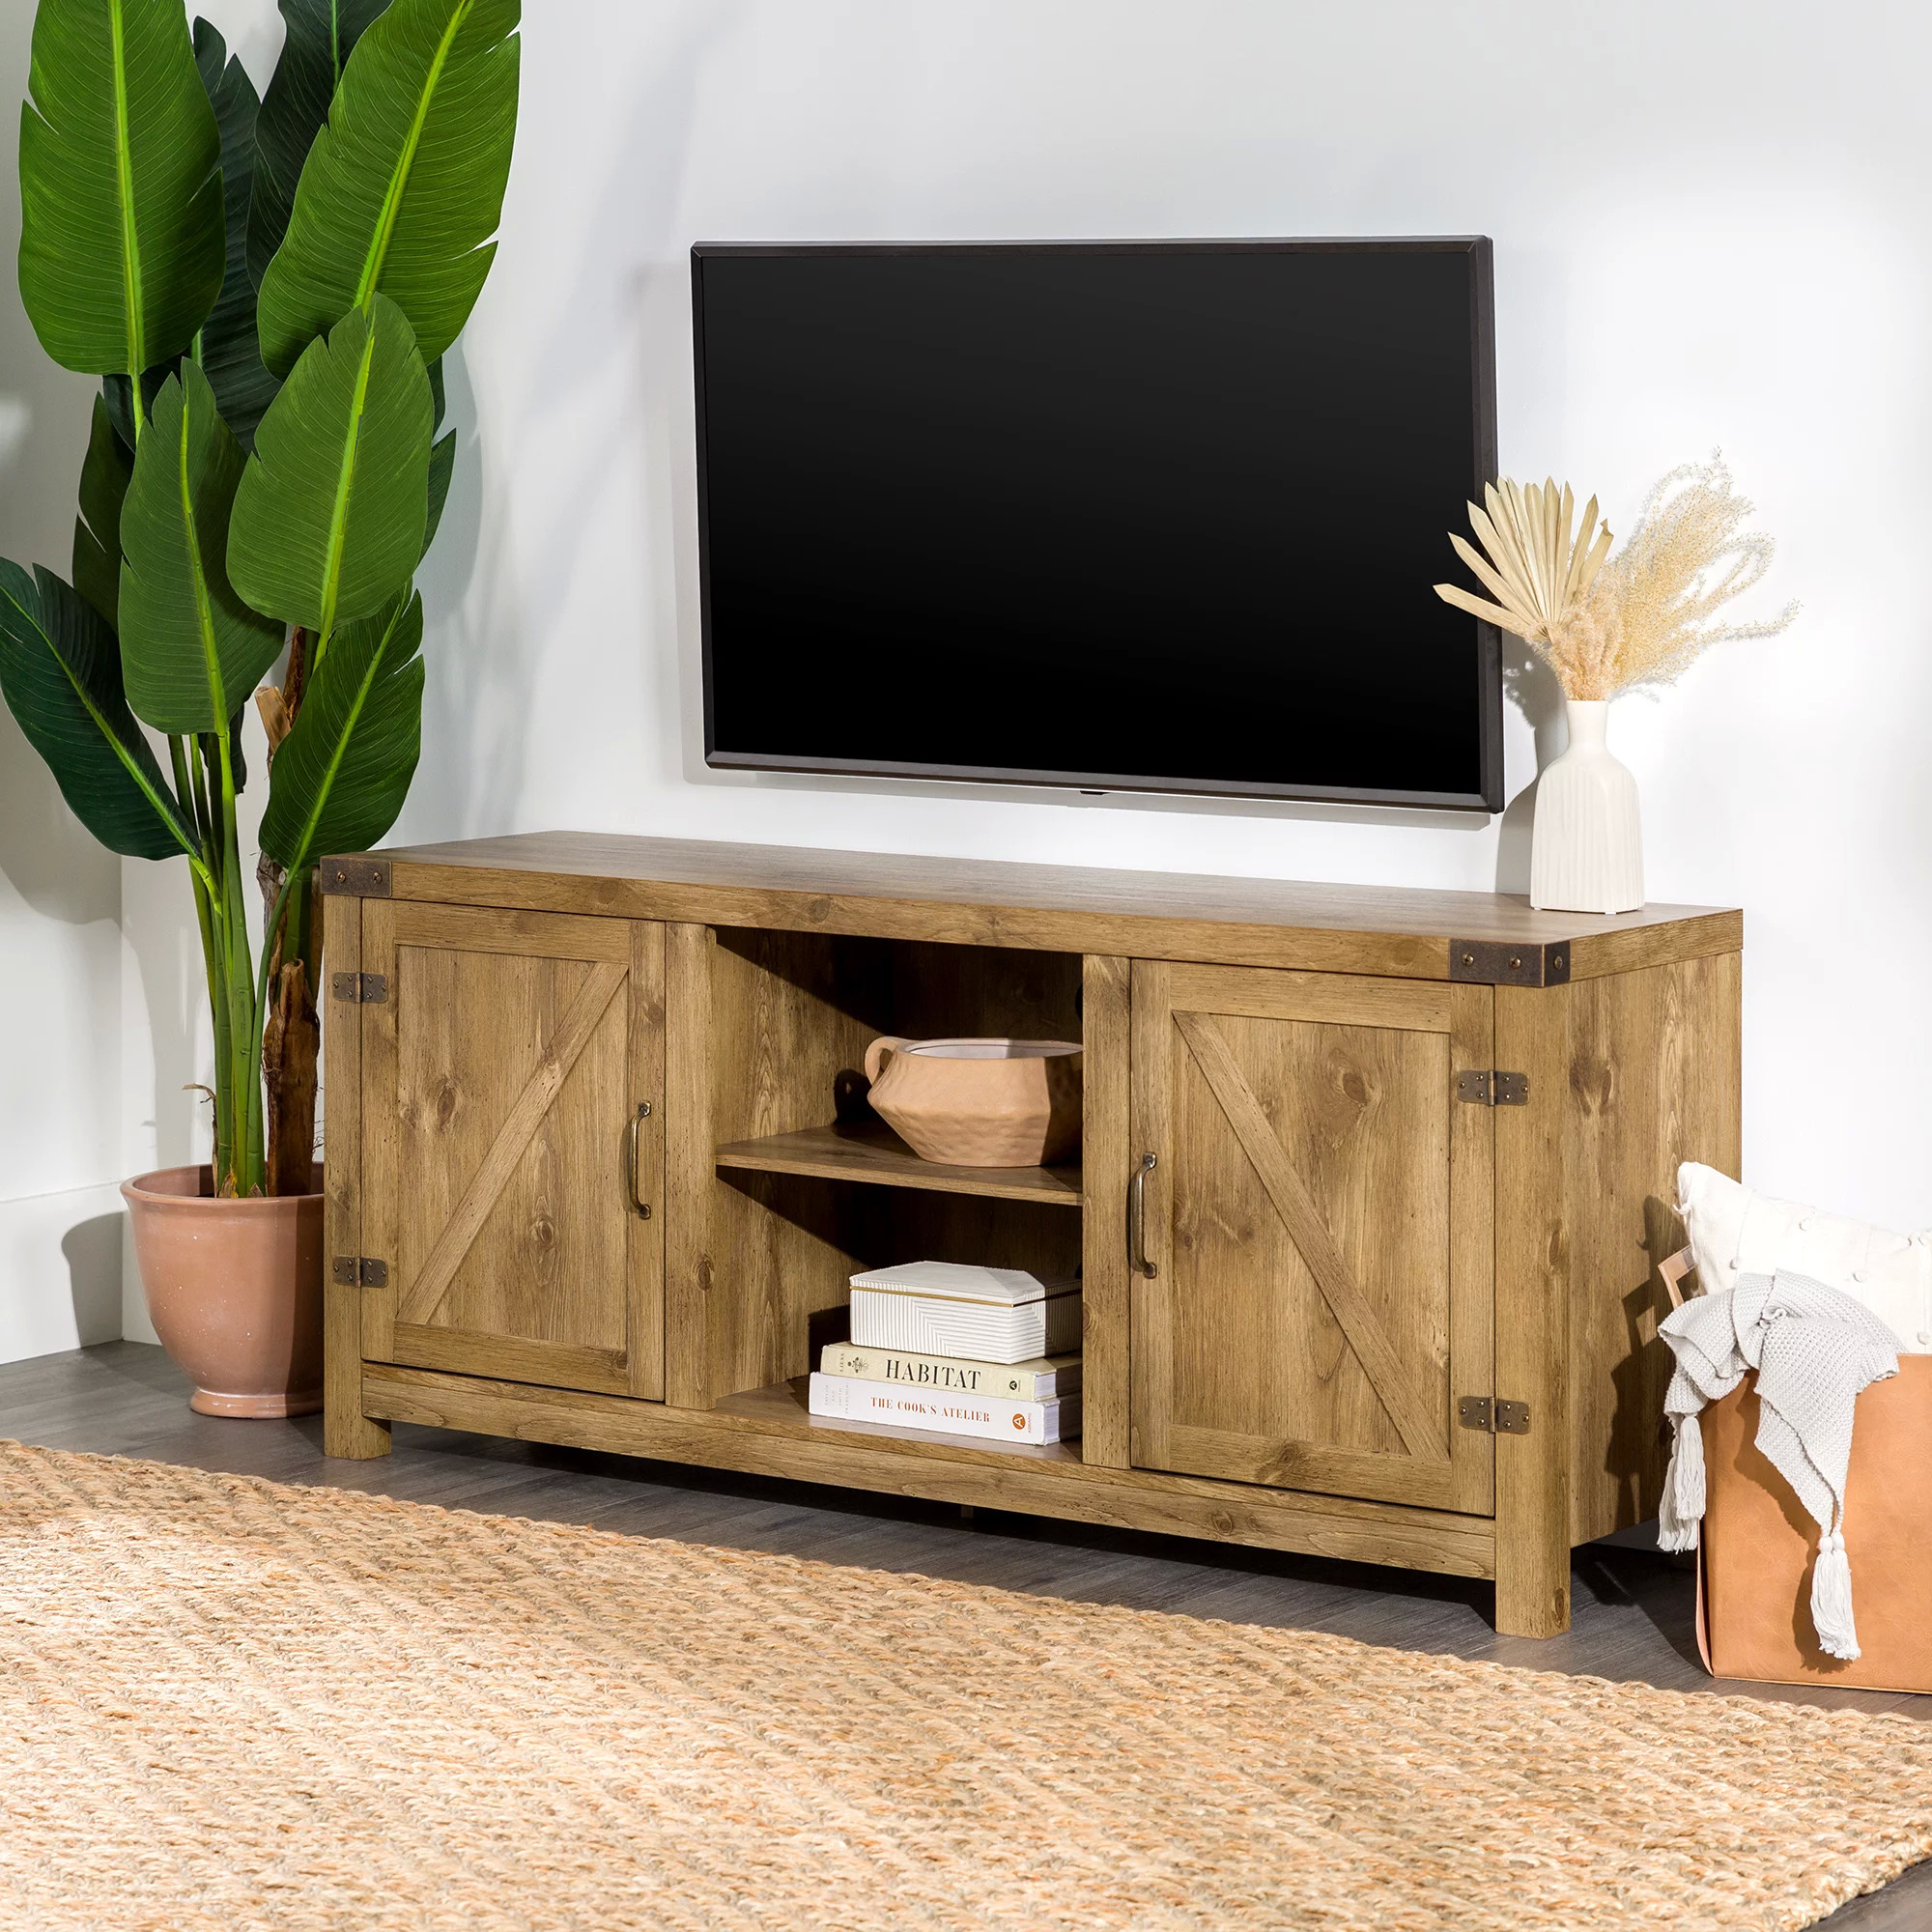 Woven Paths Modern Farmhouse Barn Door TV Stand for TVs up to 65" (Various Colors) $118 + Free Shipping